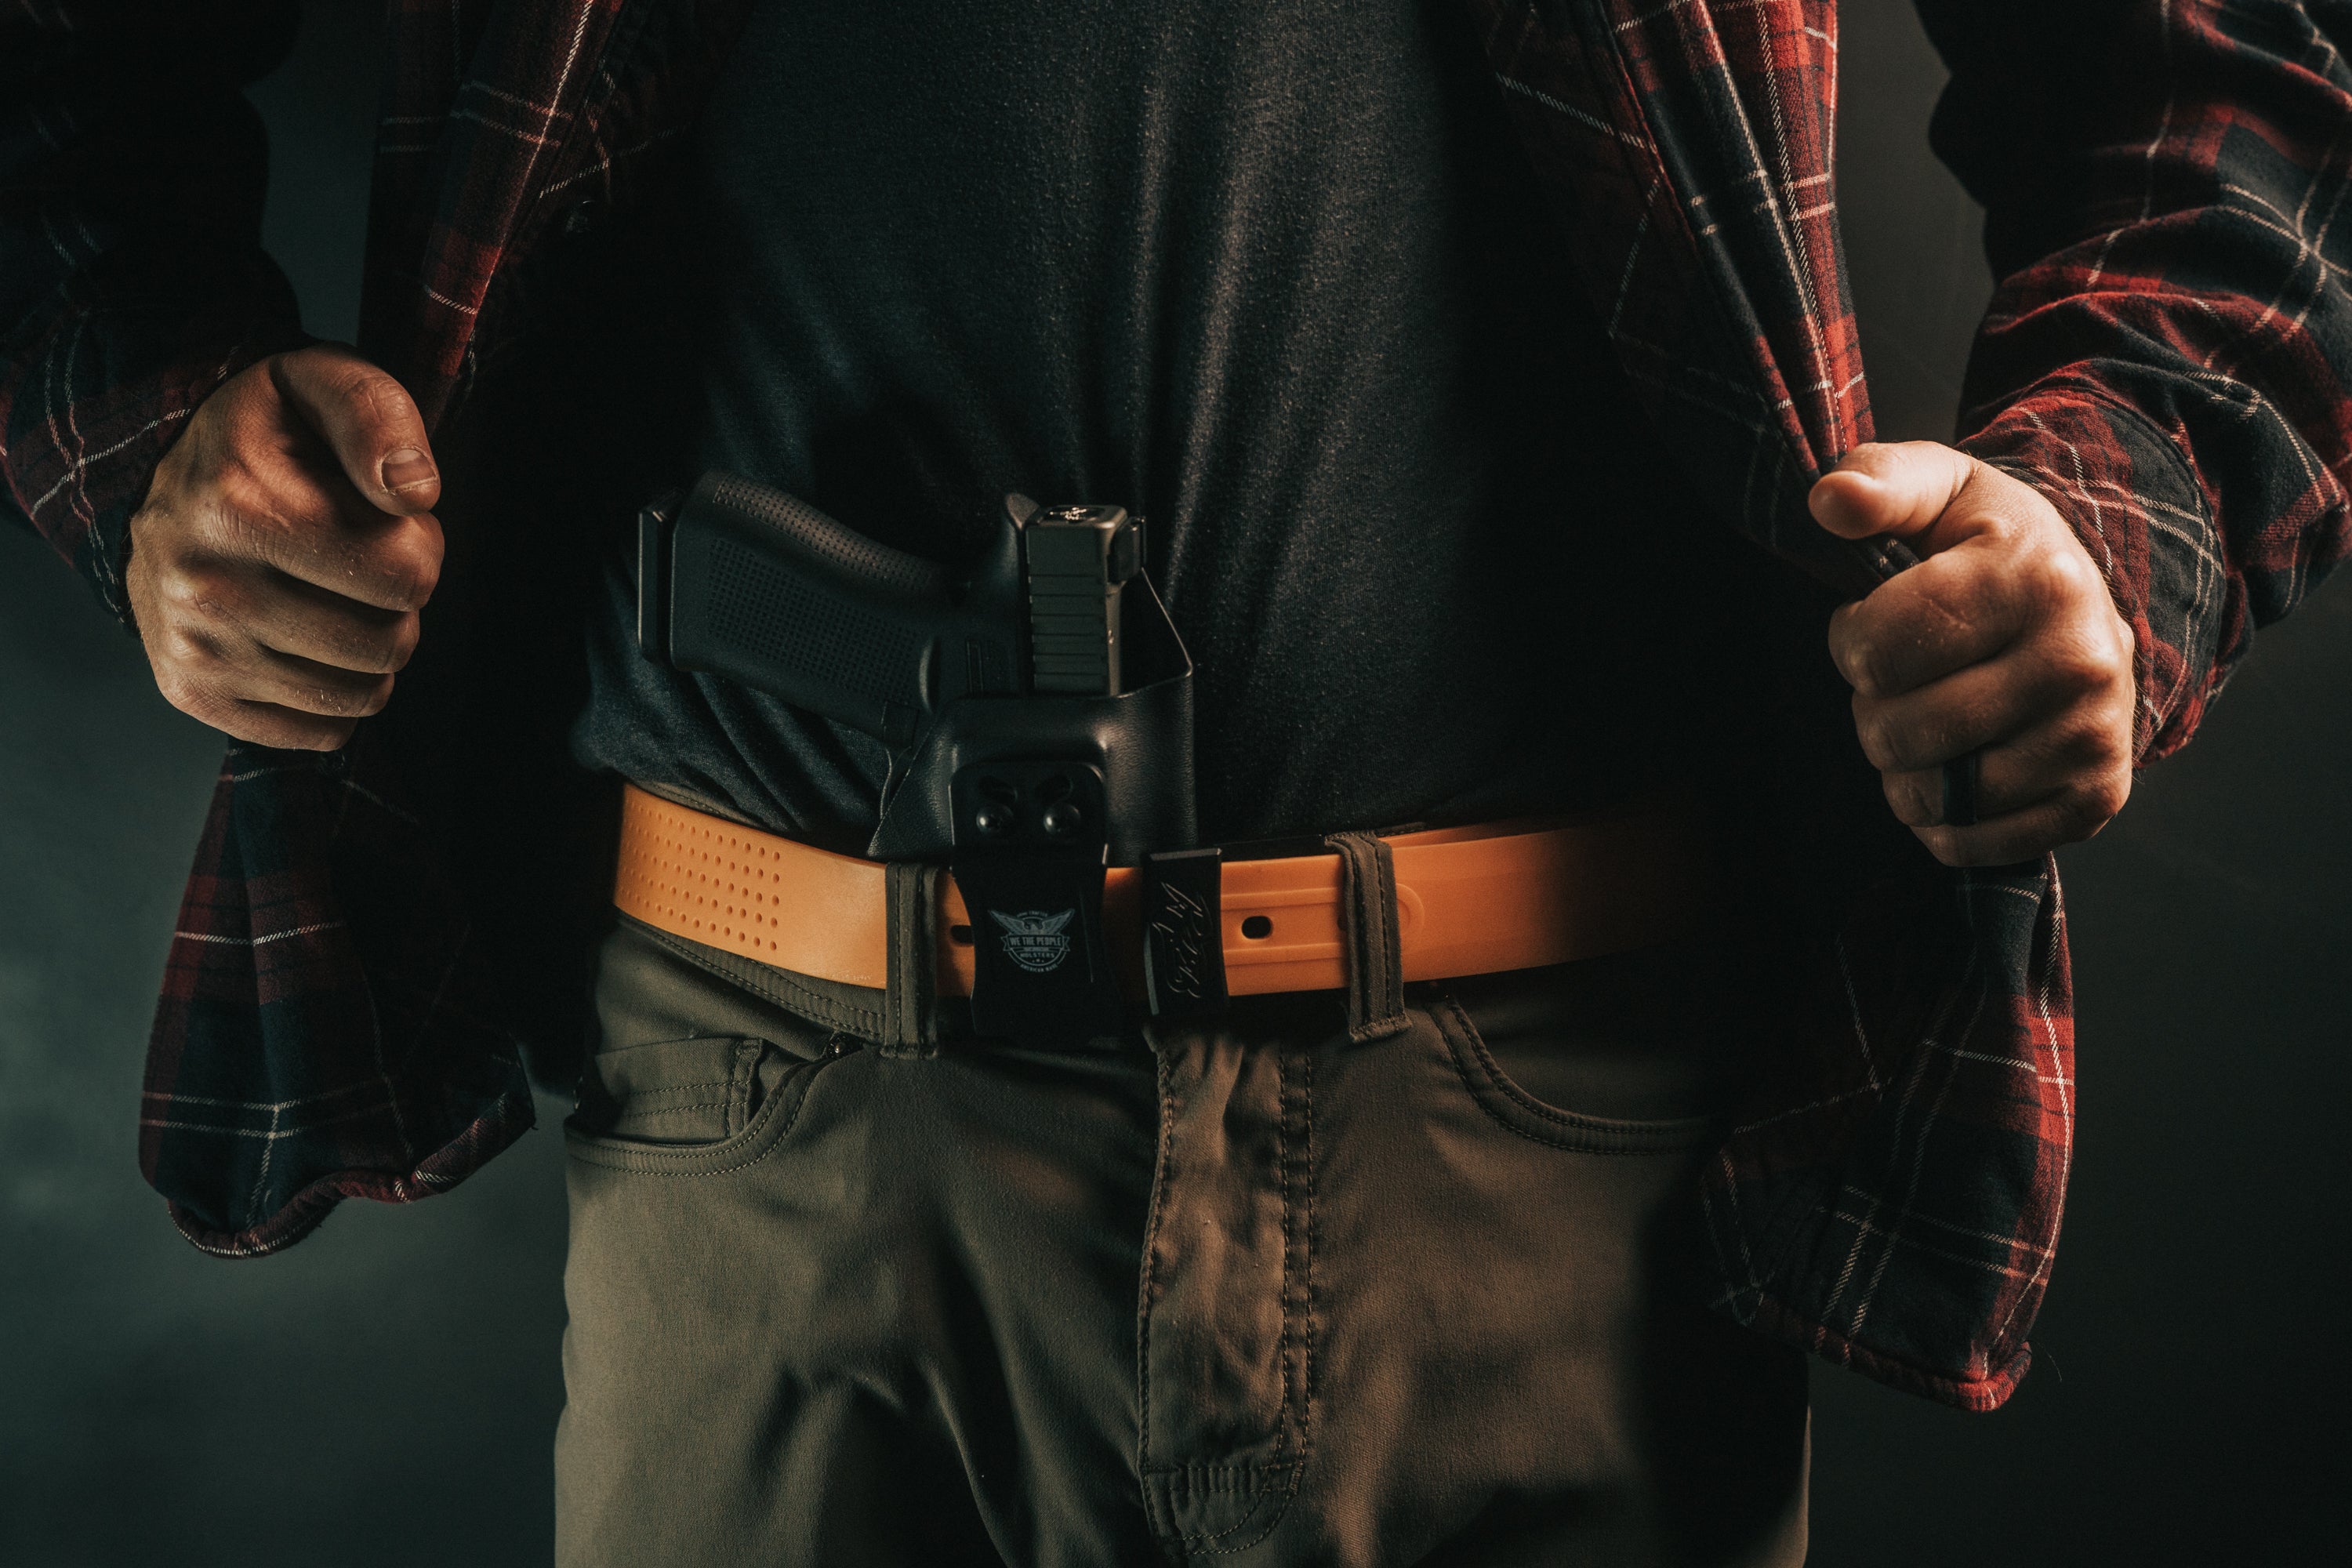 Appendix carry belt  by Ridge Belts. Tactical belt buckle for the outdoors. Simple mens belt buckle for conceal carry. EDC belt for all sizes. Lightweight mountain hiking belt. Tactical conceal carry belt for every day carry. Military grade belt for men.